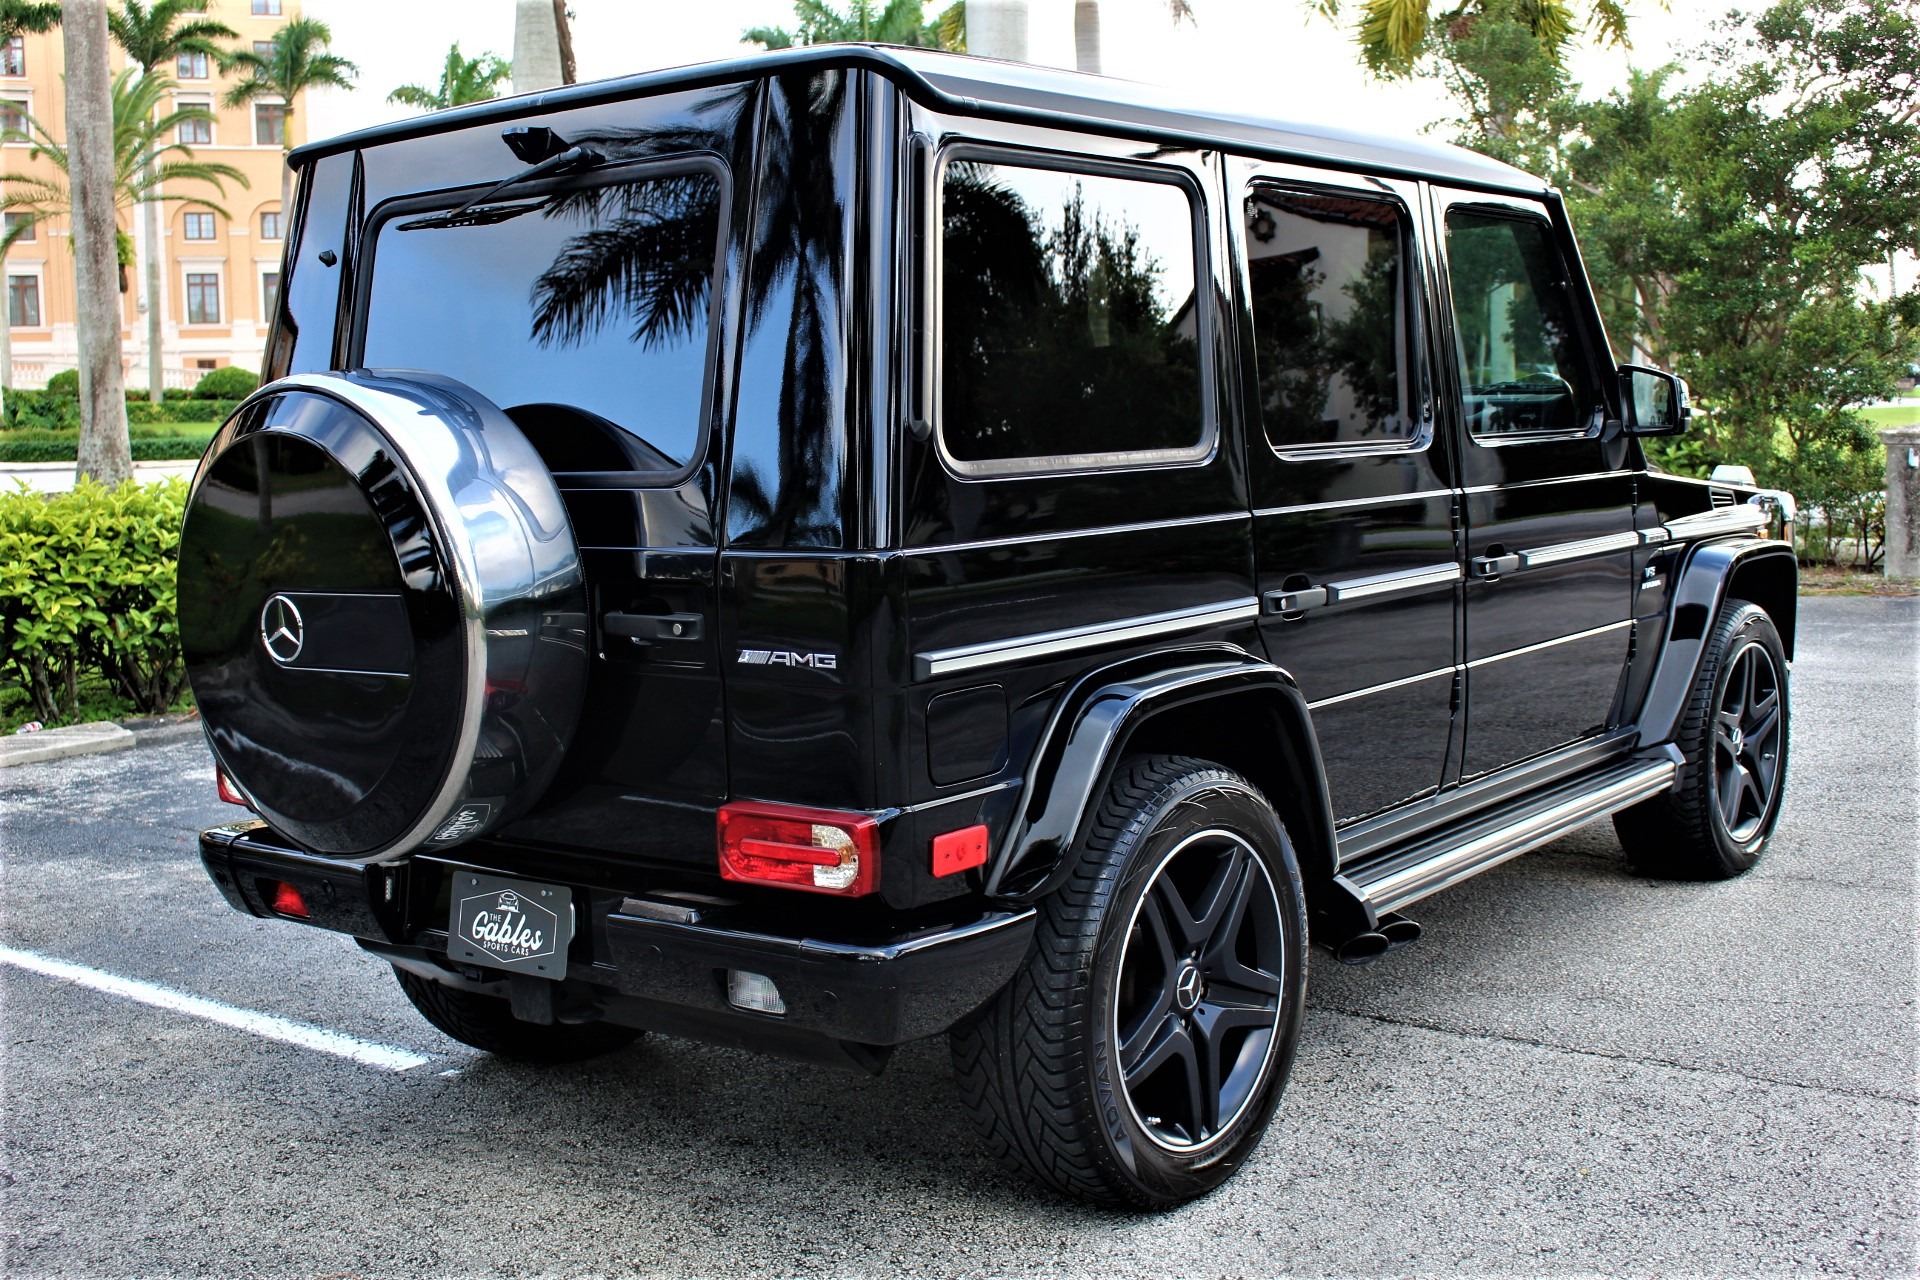 Used 2013 Mercedes-Benz G-Class G 63 AMG for sale Sold at The Gables Sports Cars in Miami FL 33146 4